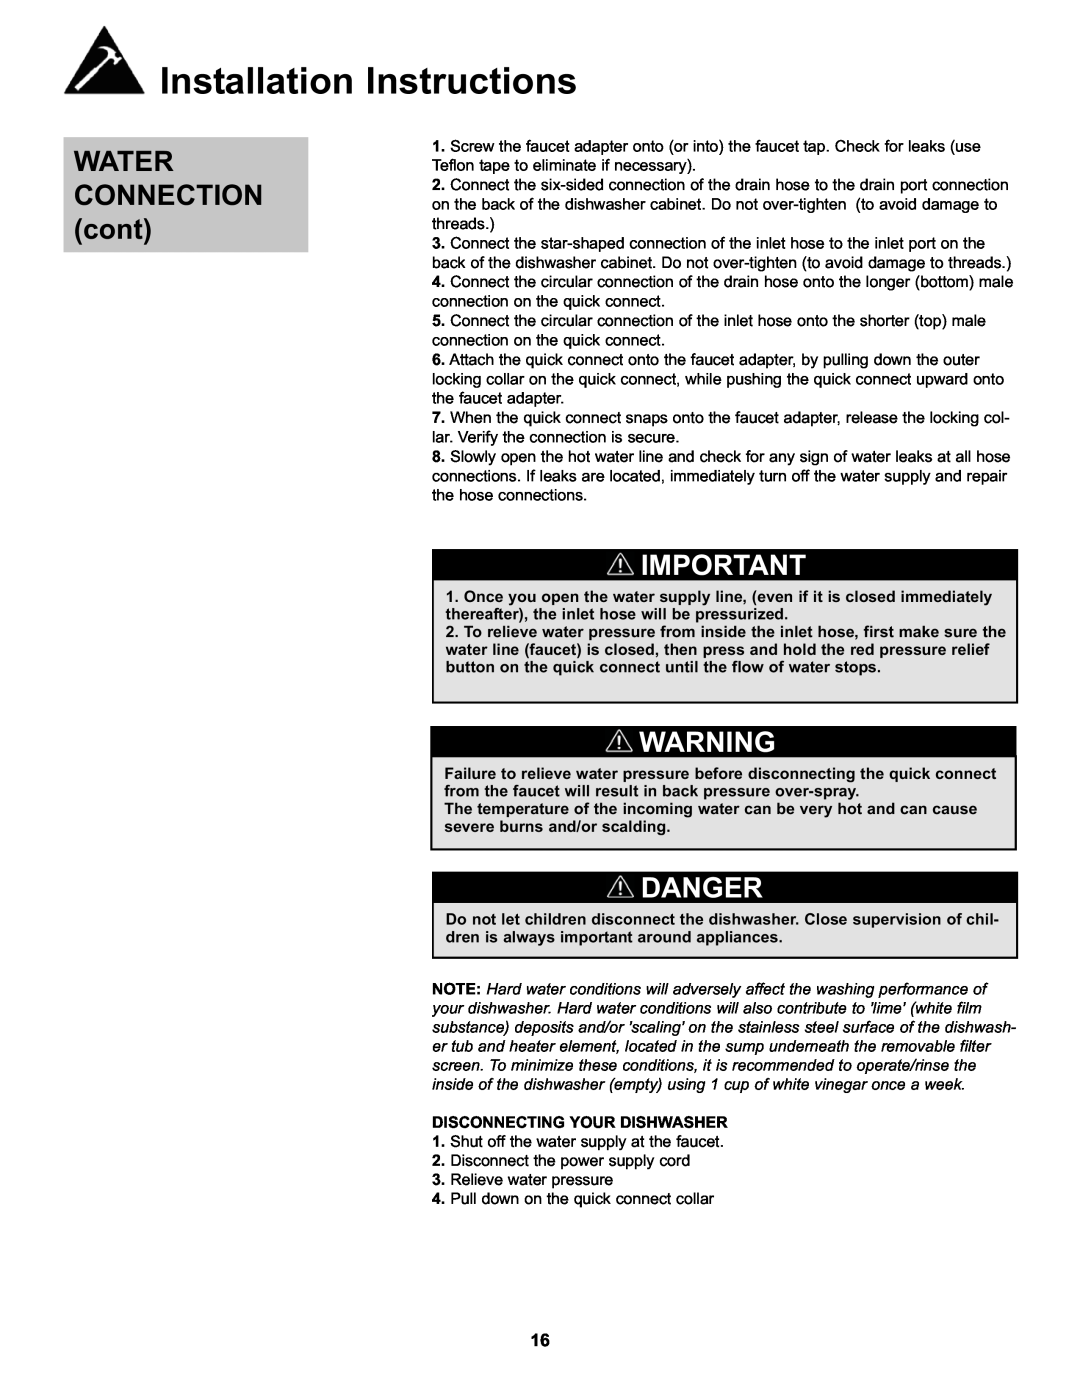 Danby DDW611WLED manual WATER CONNECTION cont, Danger, Installation Instructions, Disconnecting Your Dishwasher 